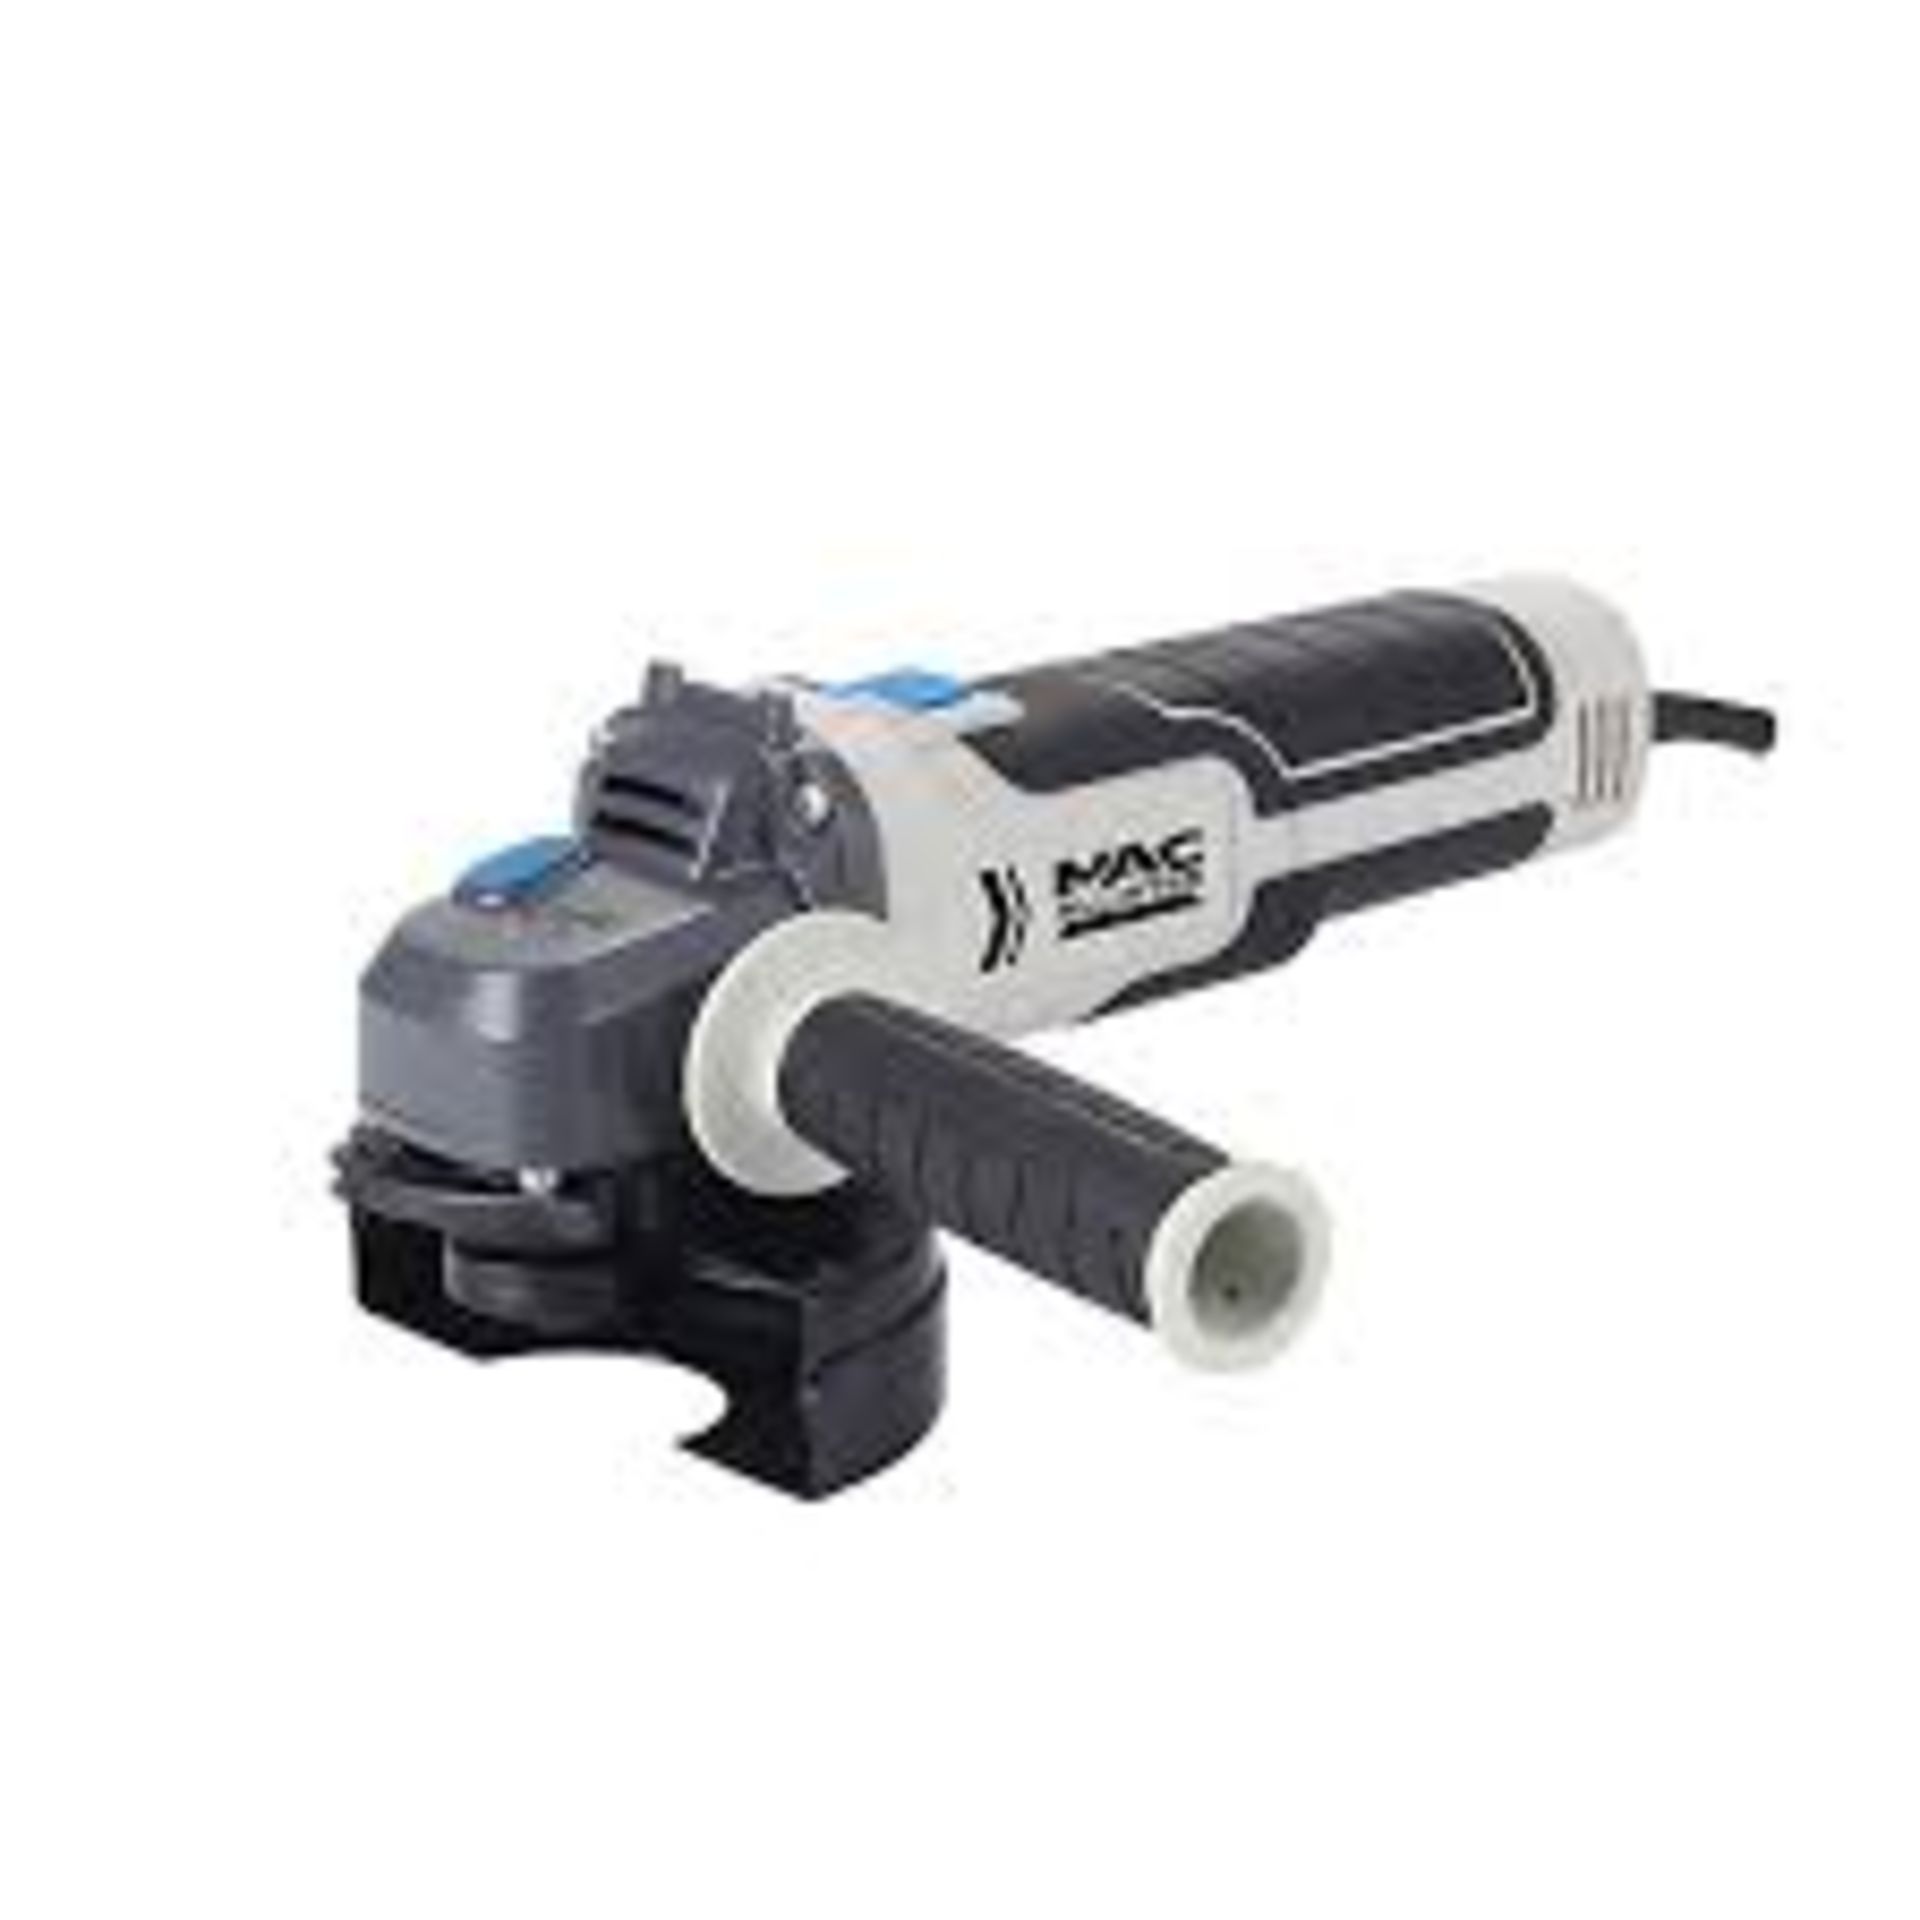 Mac Allister 750W Corded Angle Grinder 240V 115mm MAG750-115. - ER23. Compact and powerful 750W